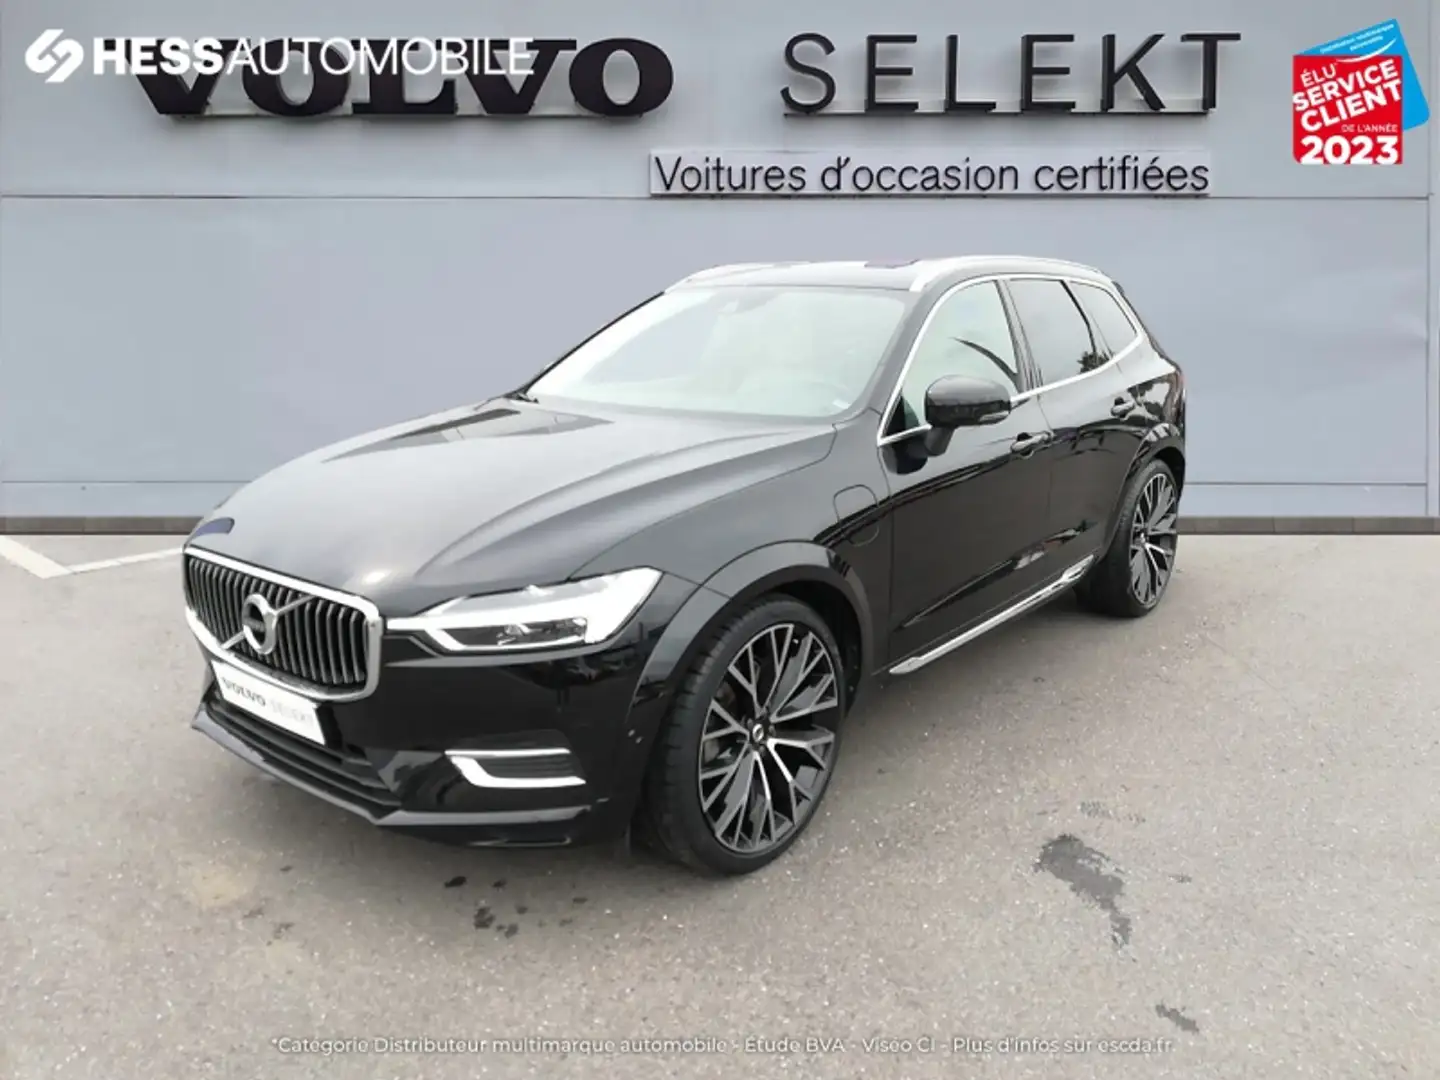 Volvo XC60 T8 Twin Engine 303 + 87ch Inscription Geartronic - 1